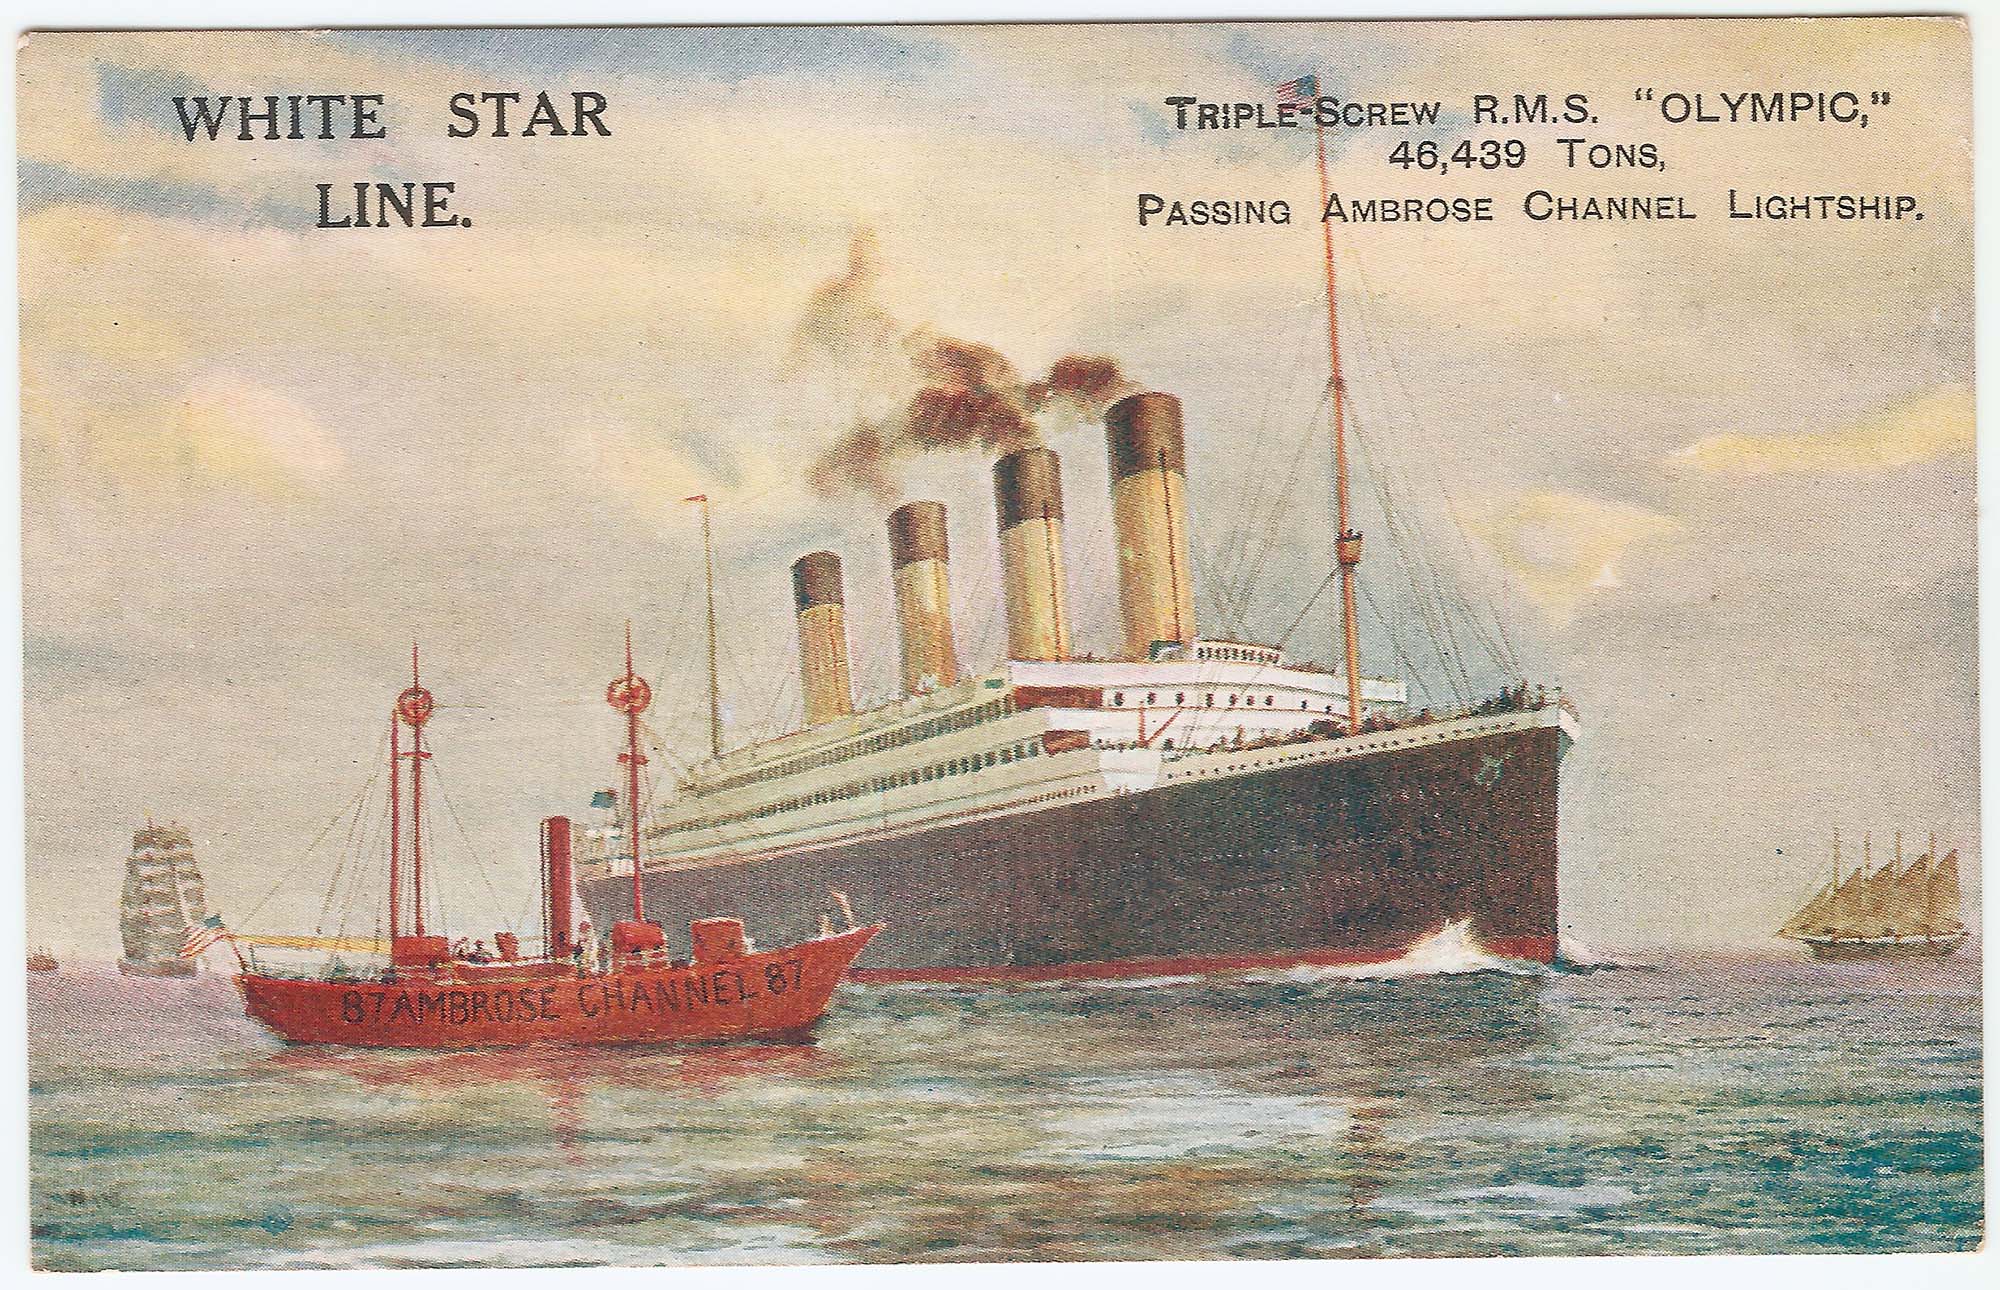 Postcard of the RMS Olympic passing the Ambrose Channel lightship” in 1920